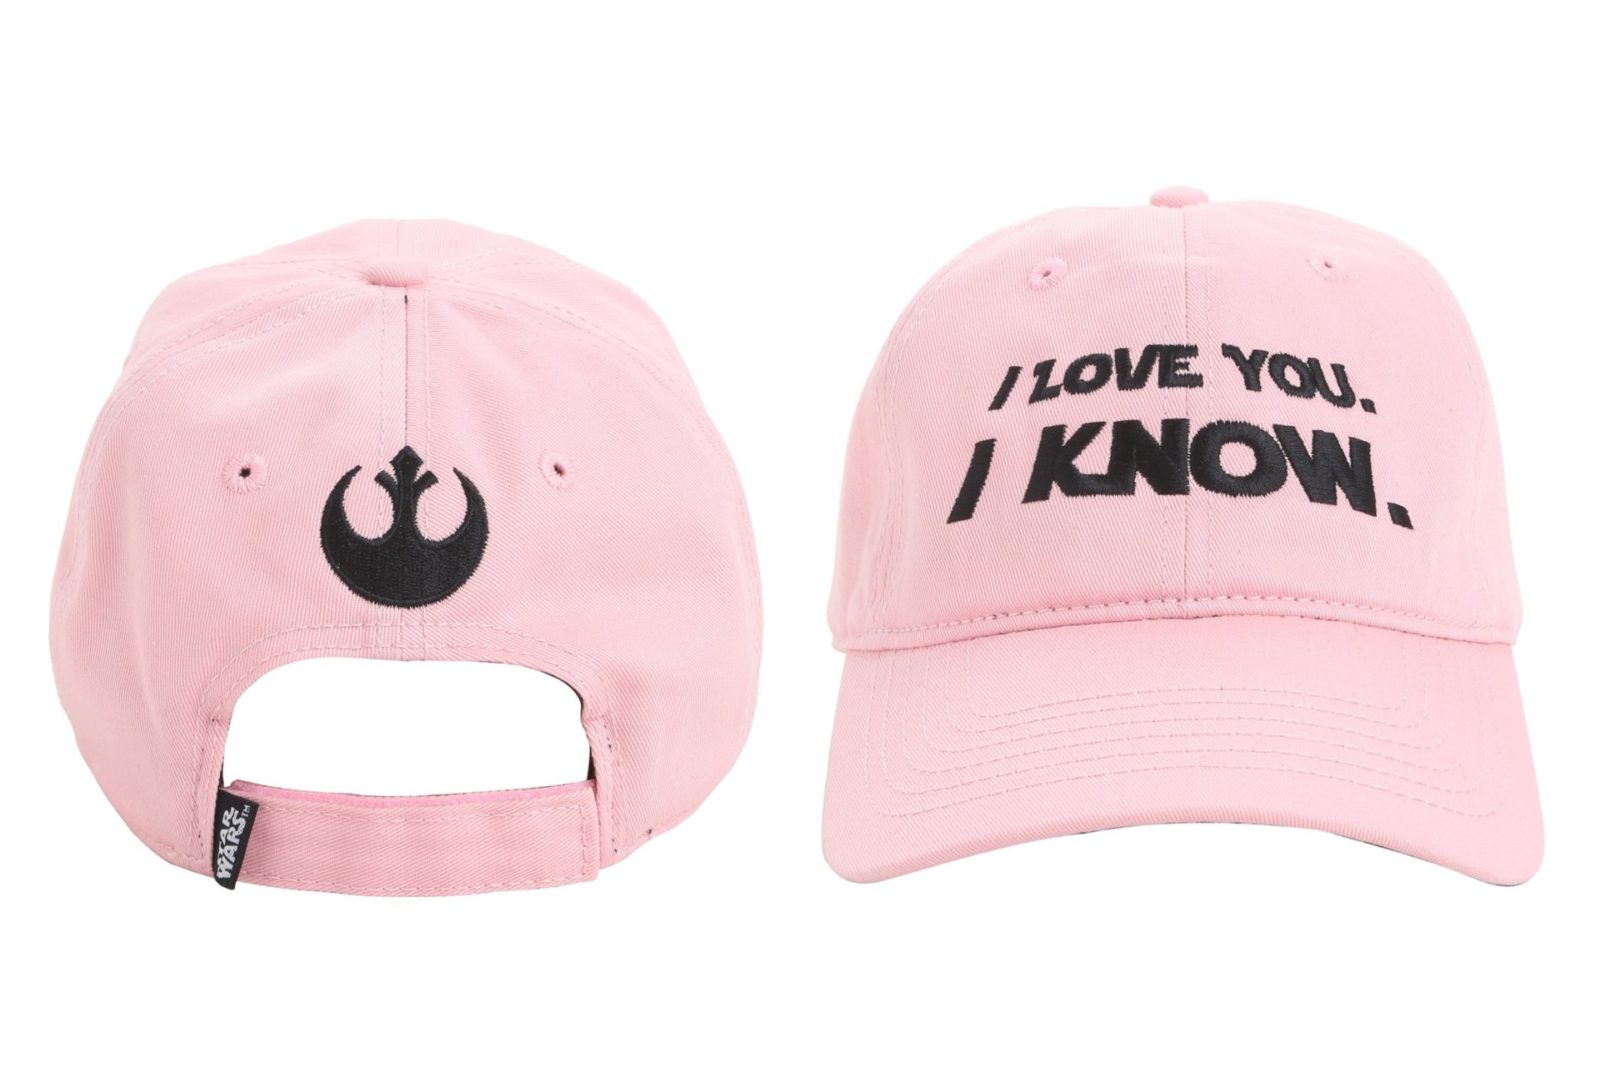 ‘I Love You’ – ‘I Know’ cap at Hot Topic